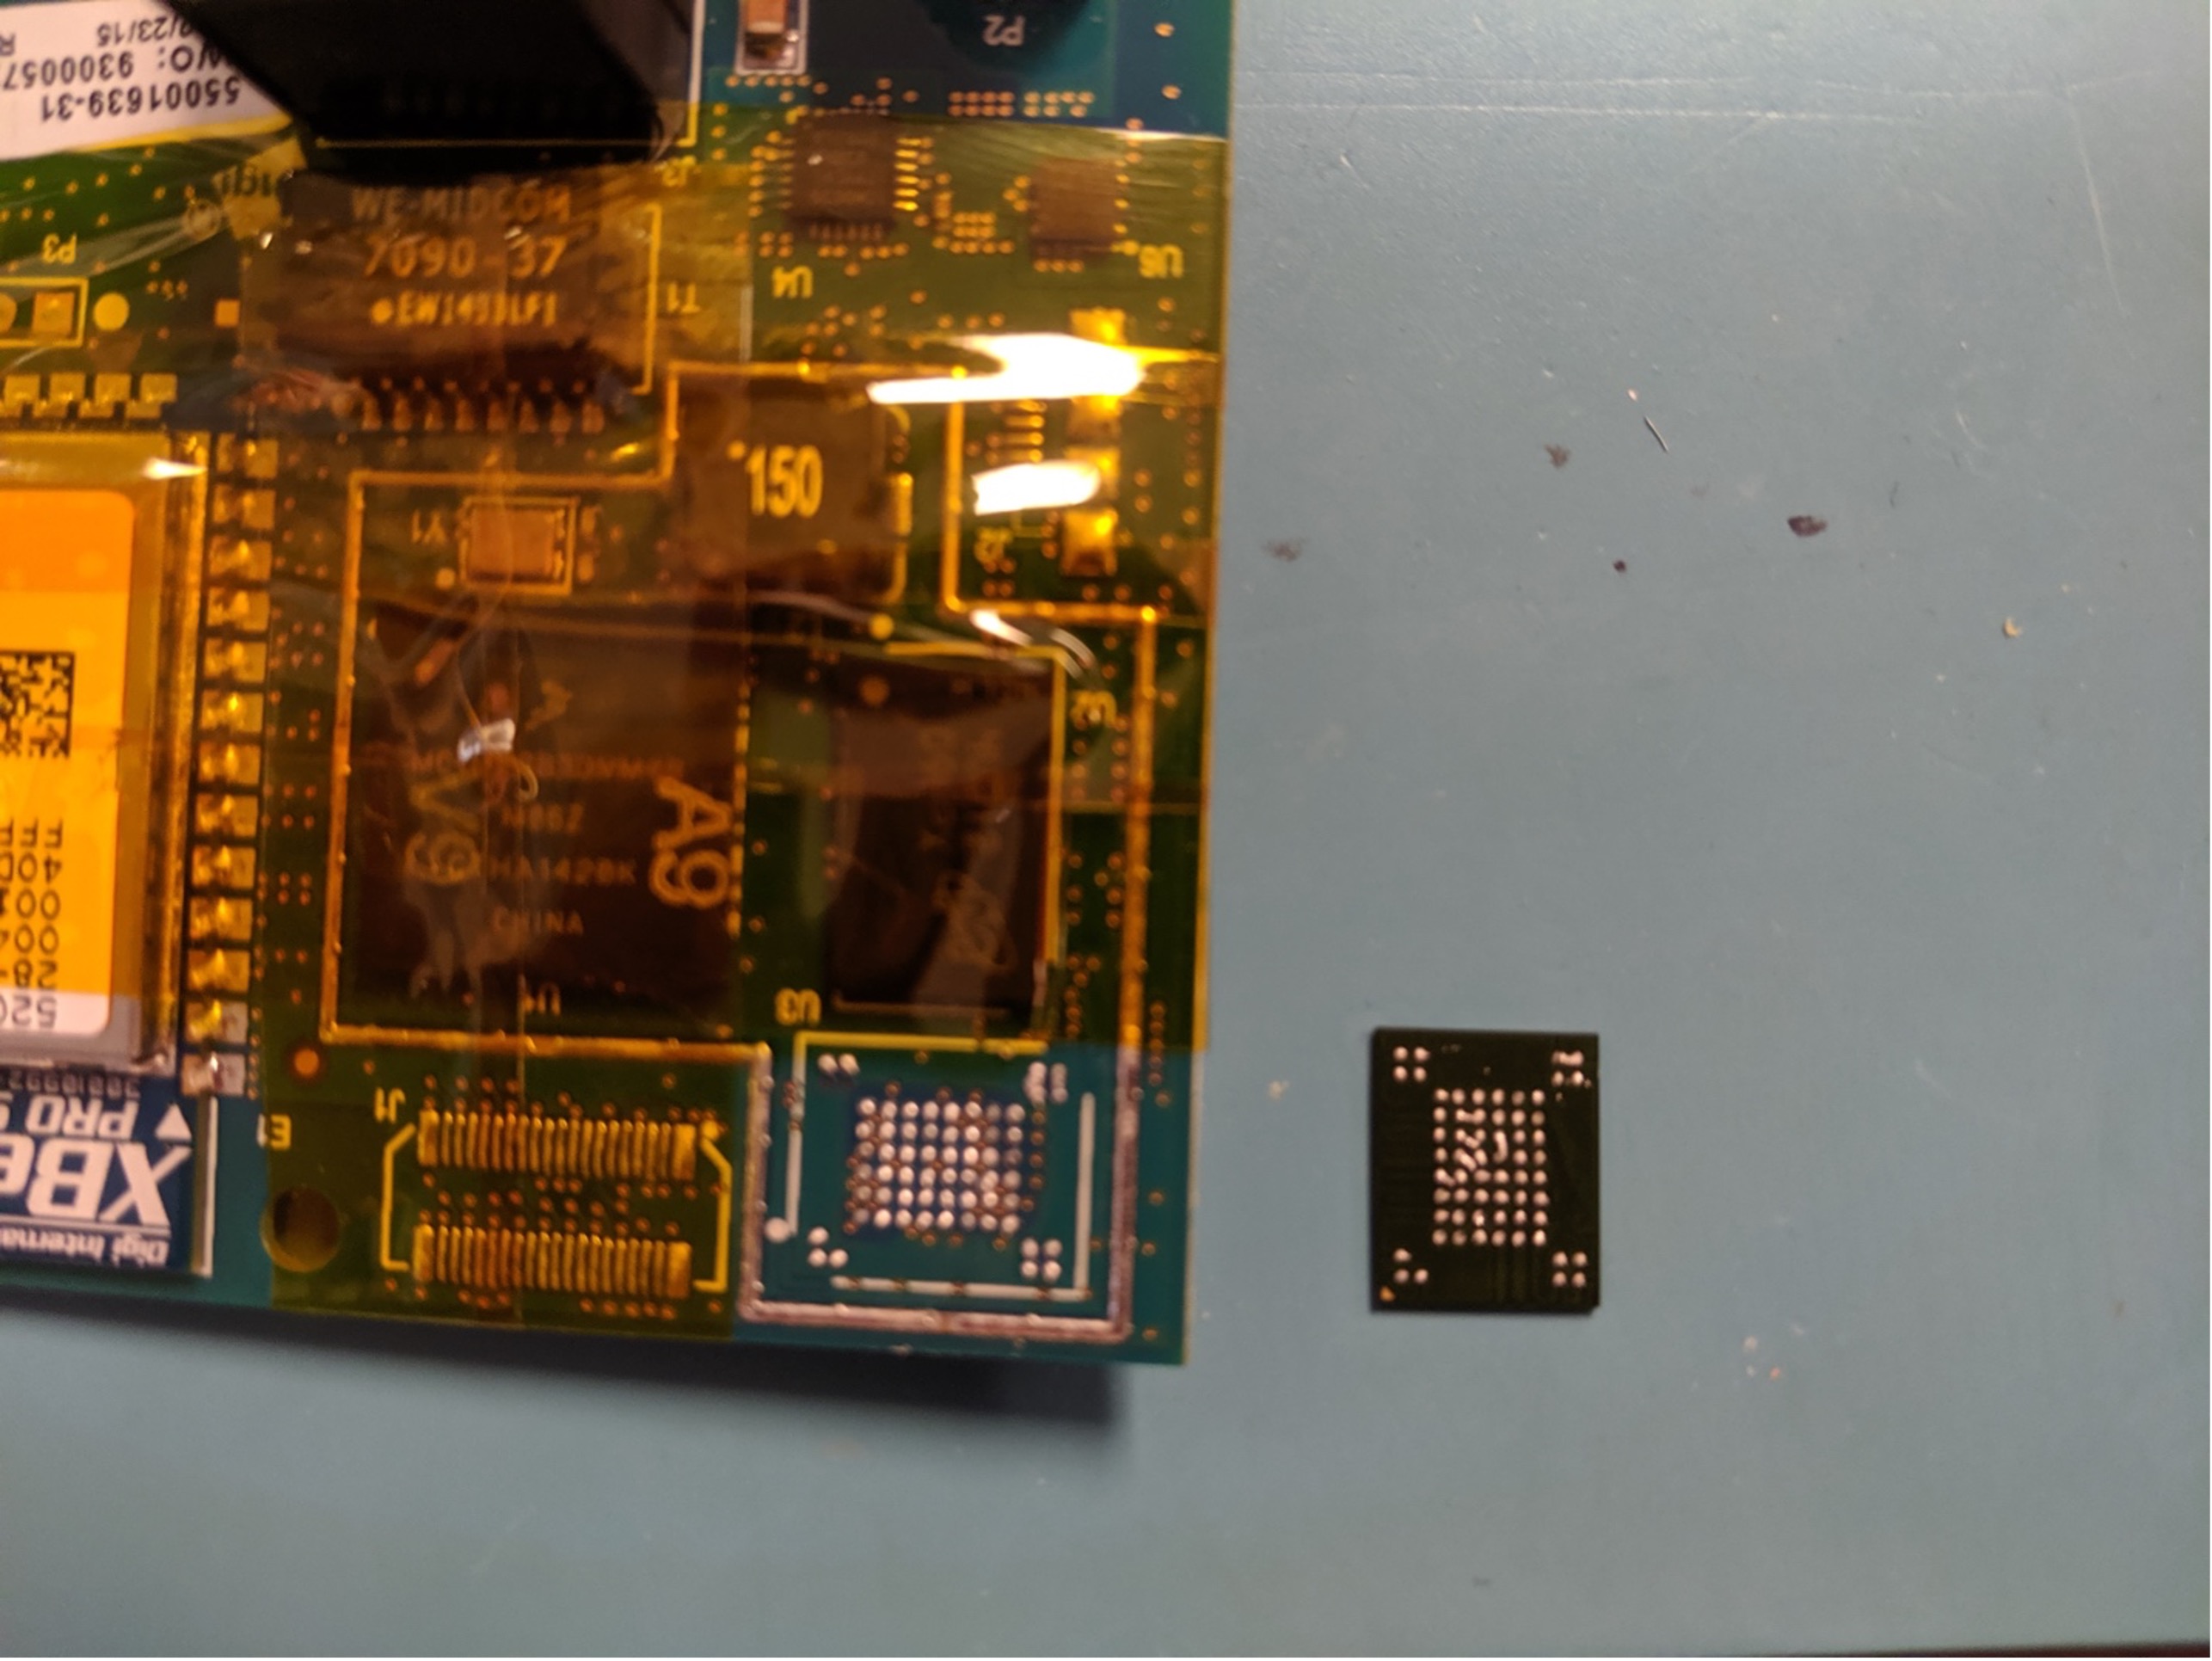 NAND removed from X2e